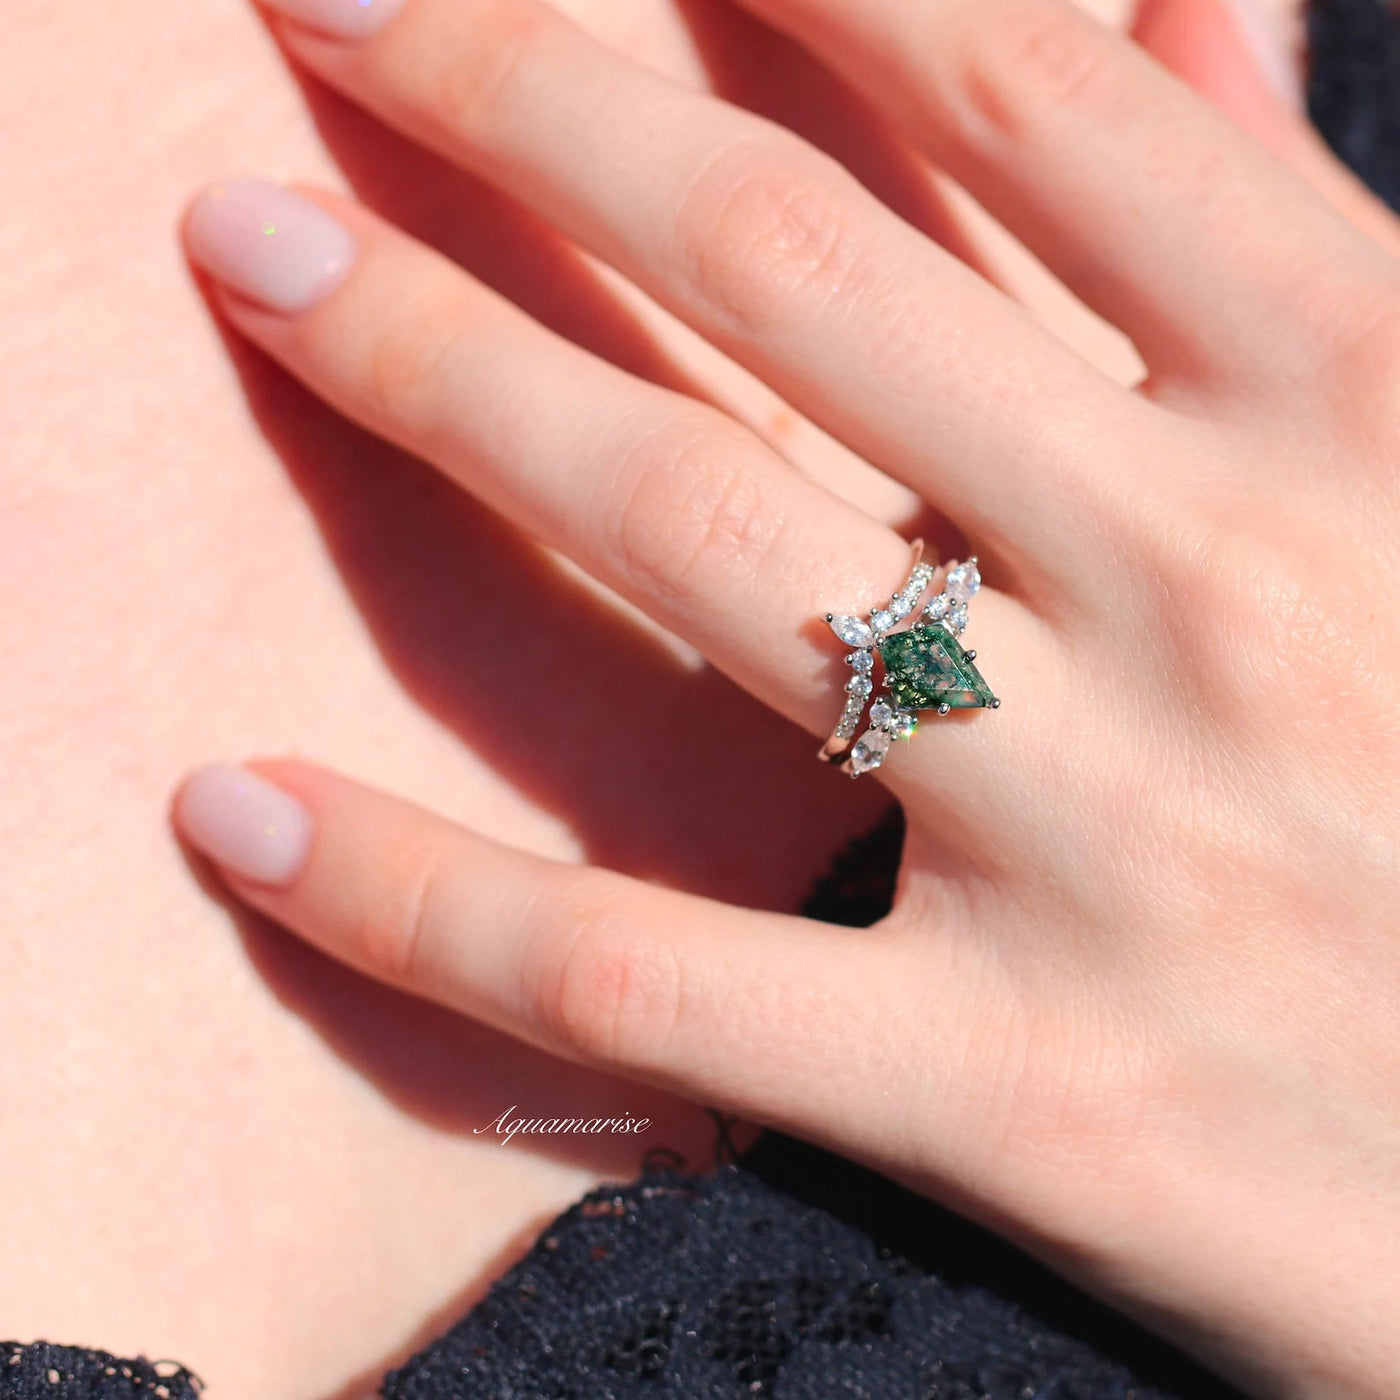 Skye Kite Green Moss Agate Ring Couples Ring- His and Hers Wedding Band- 925 Sterling Silver